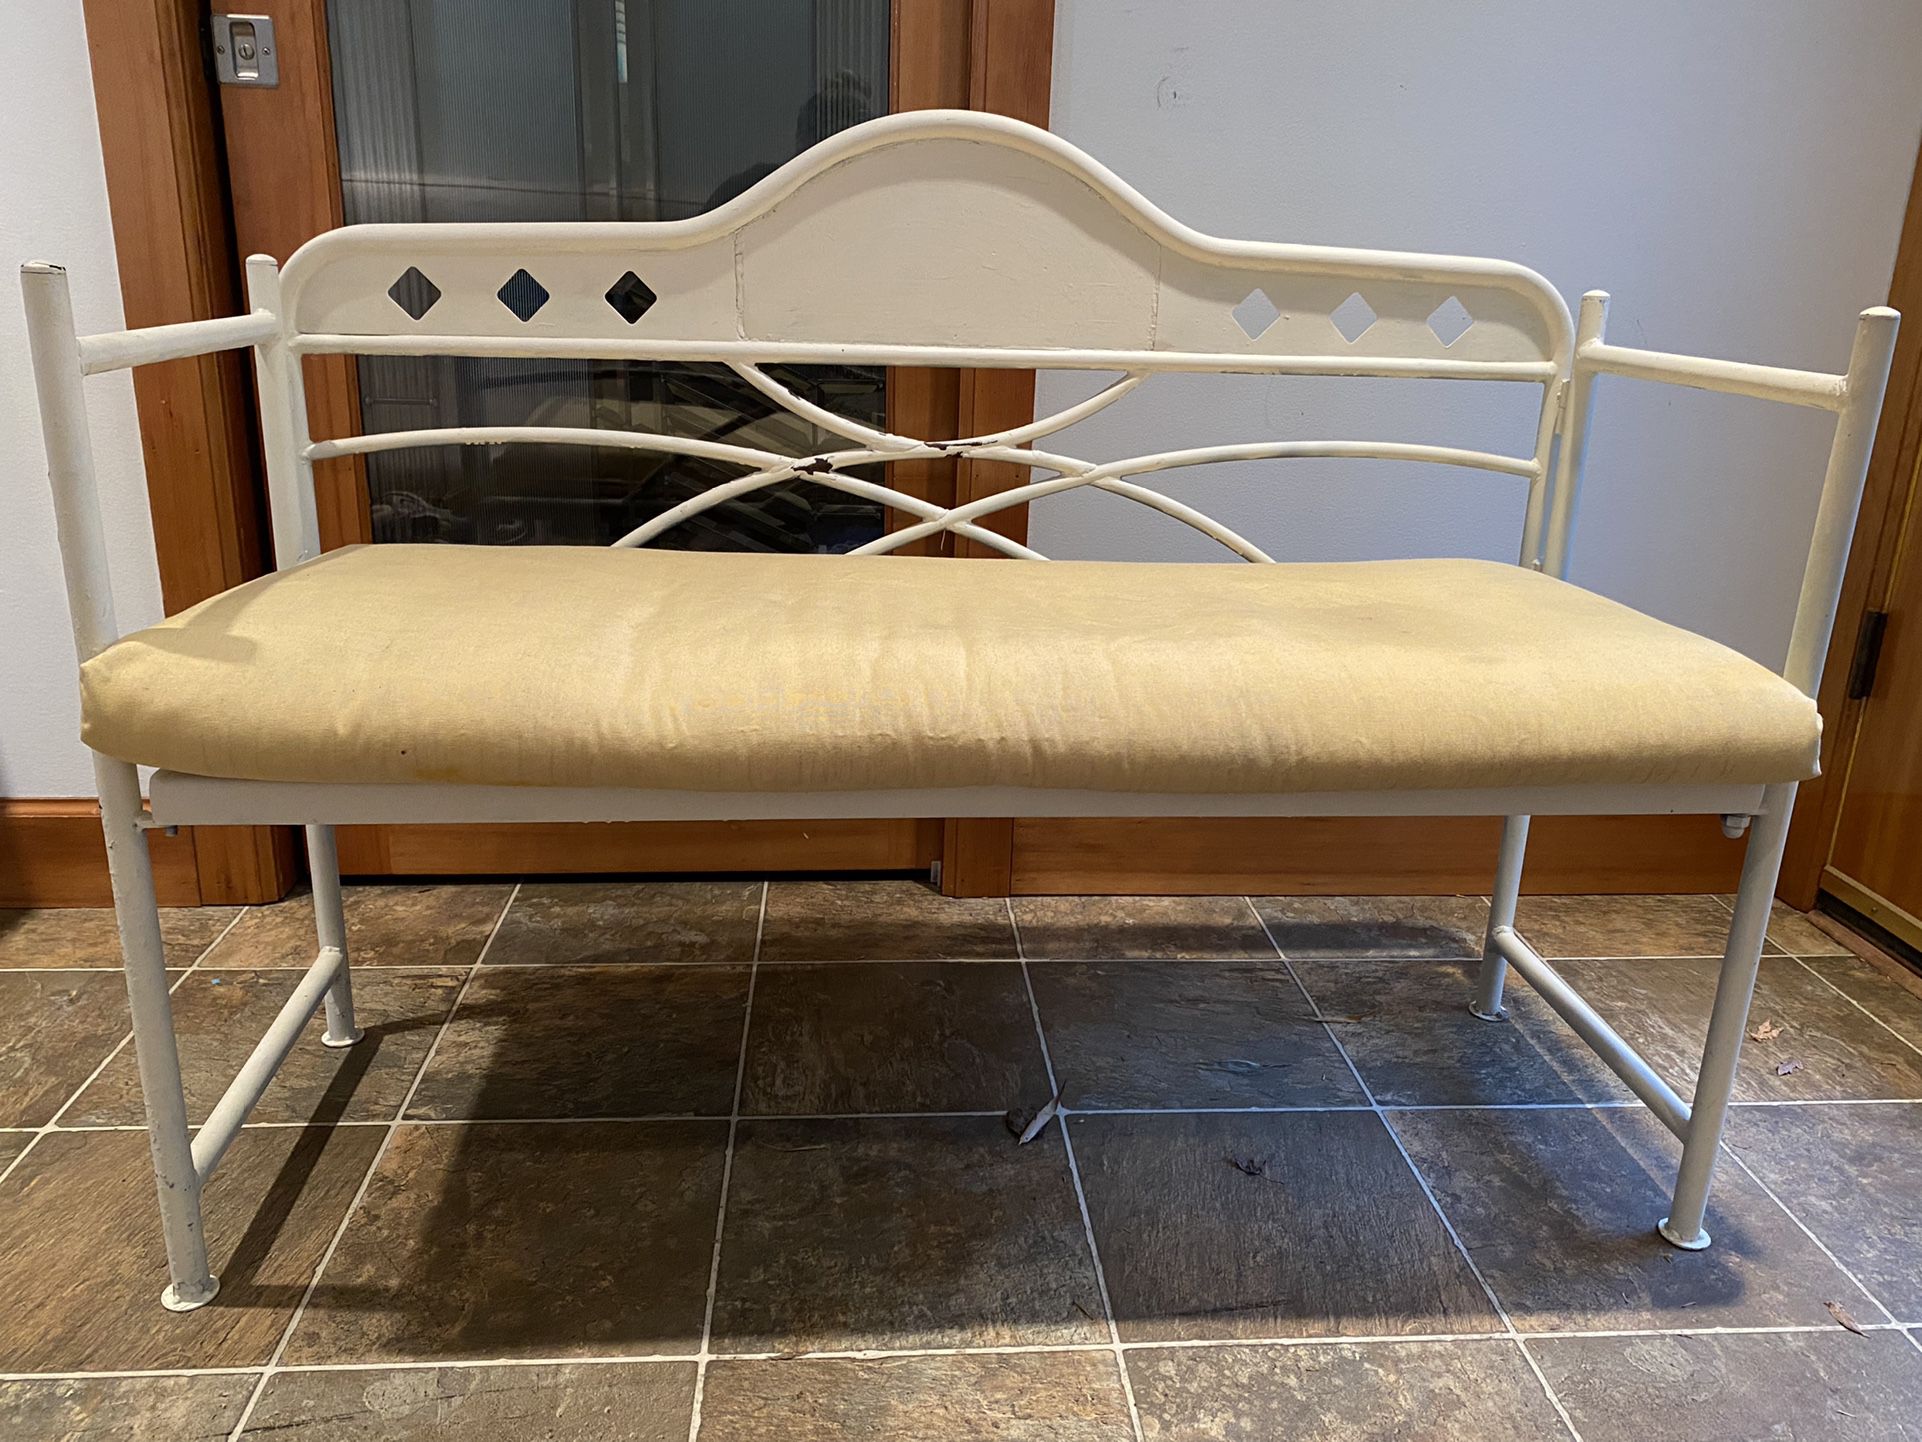 Outdoor / Entryway Bench With Cushion - Pending Pick Up 